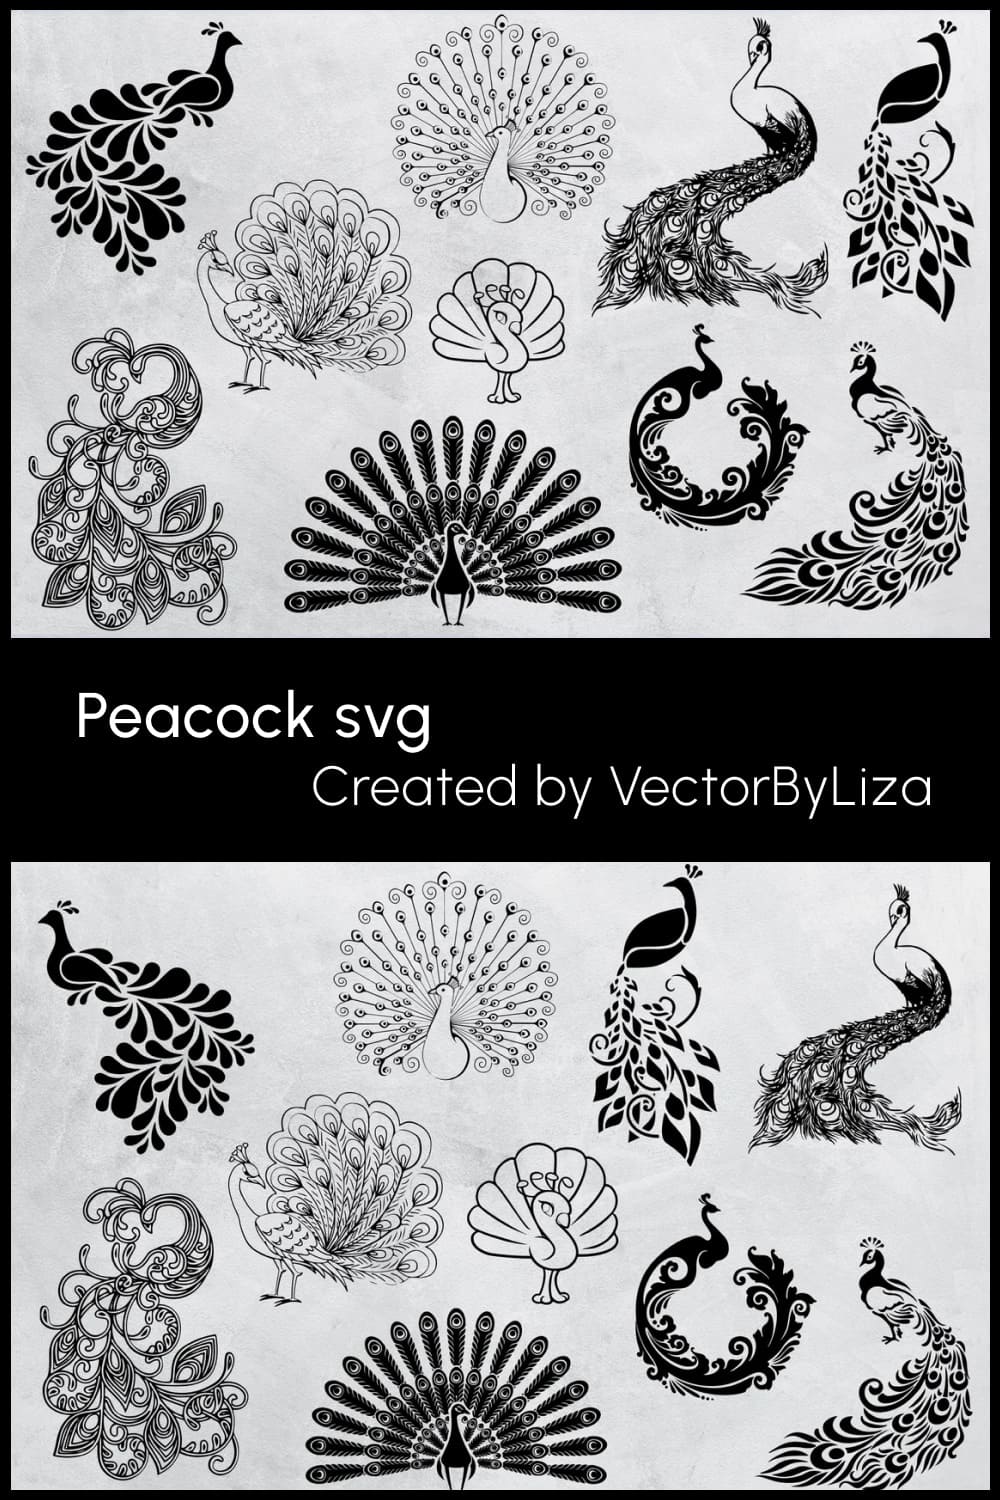 peacock svg peacock clipart pinterest image.